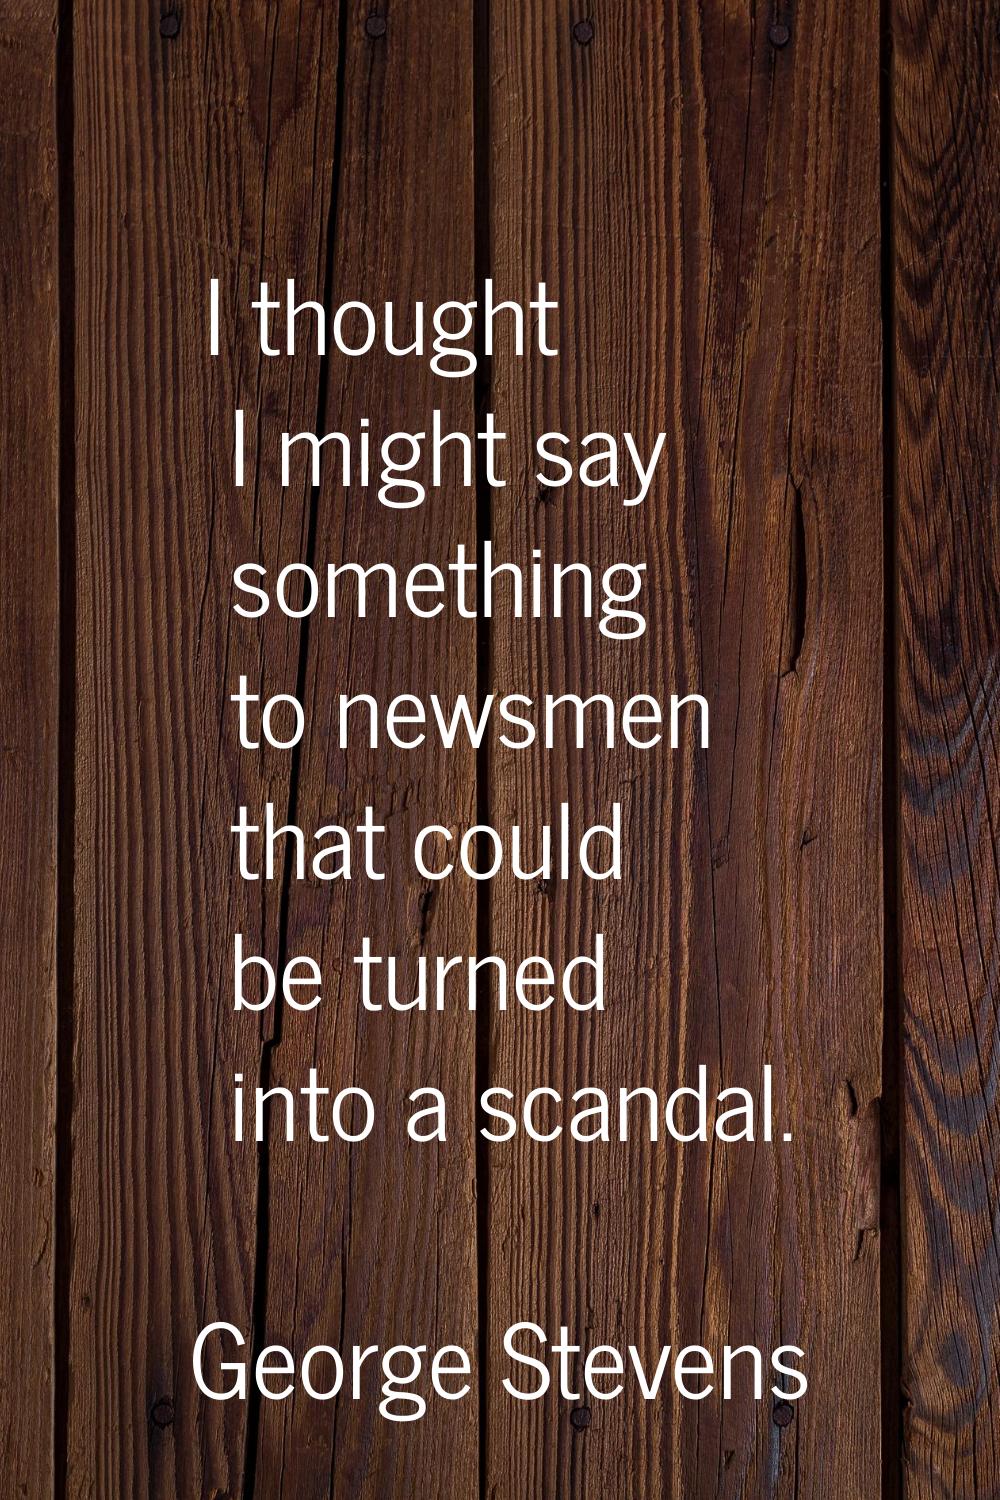 I thought I might say something to newsmen that could be turned into a scandal.